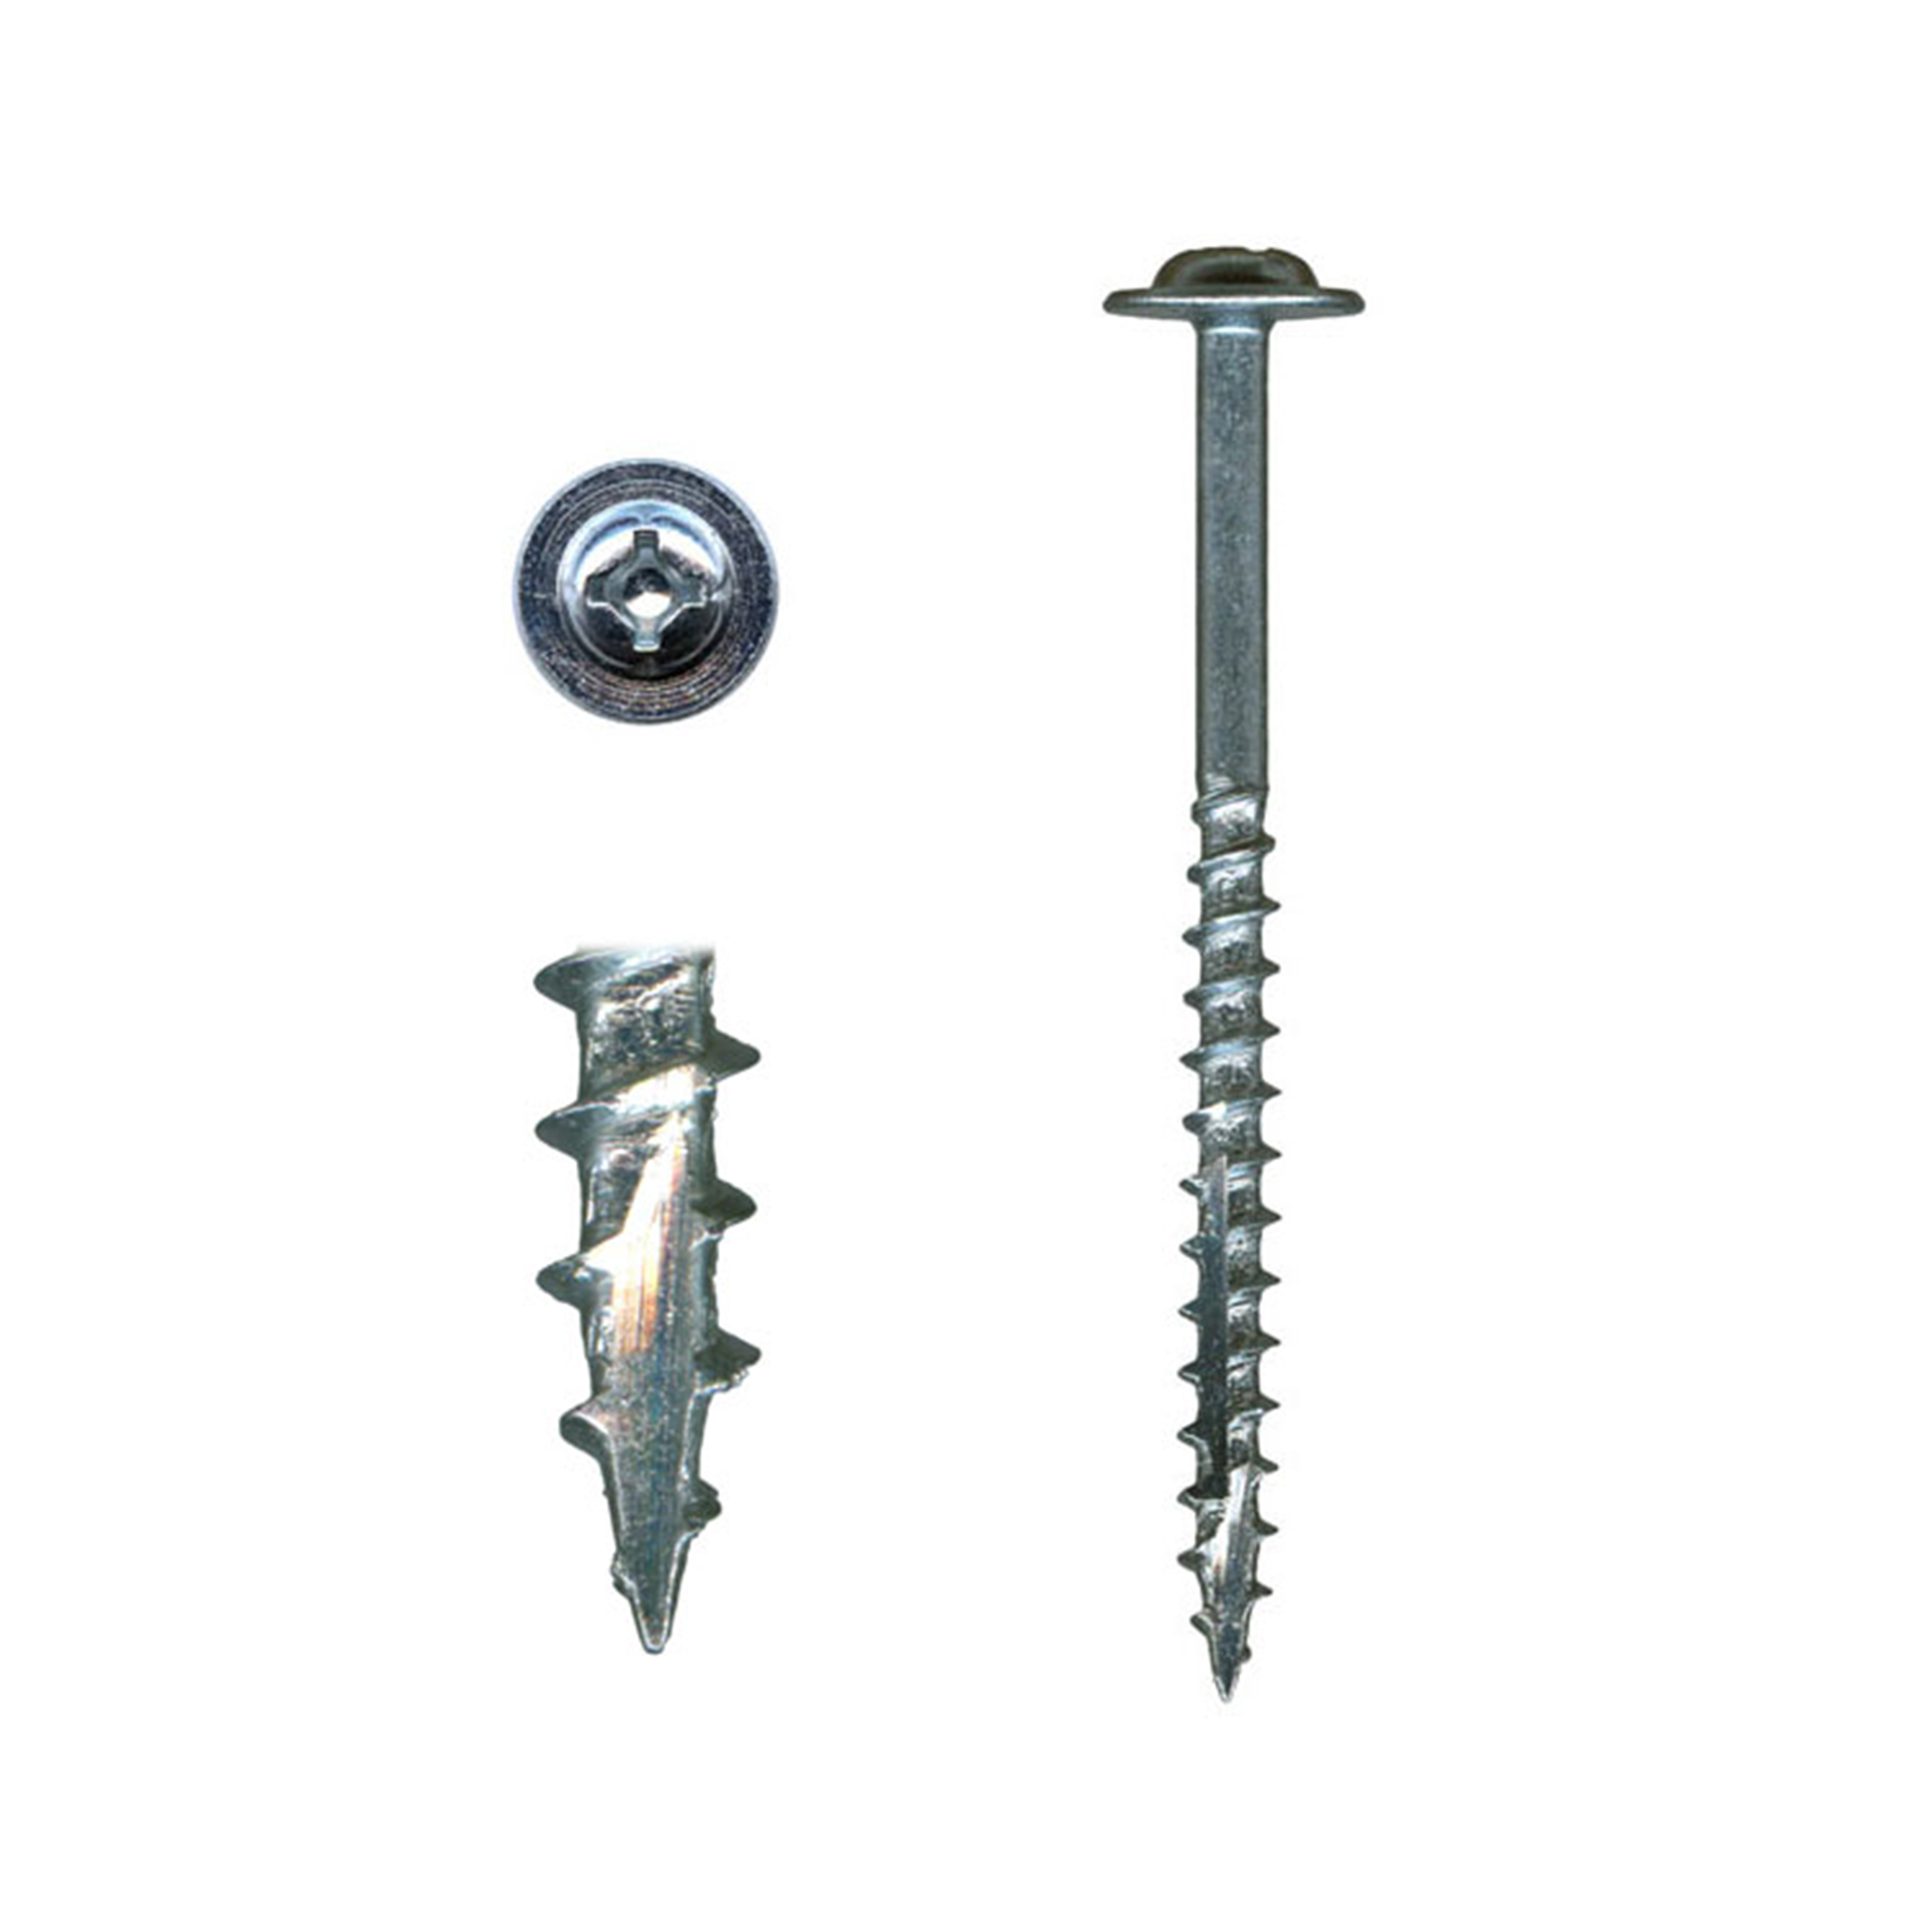 10 X 2-1/2 Cabinet Installation Screws, Washer Head, Combo Drive, Zinc With White Painted, 100-piece